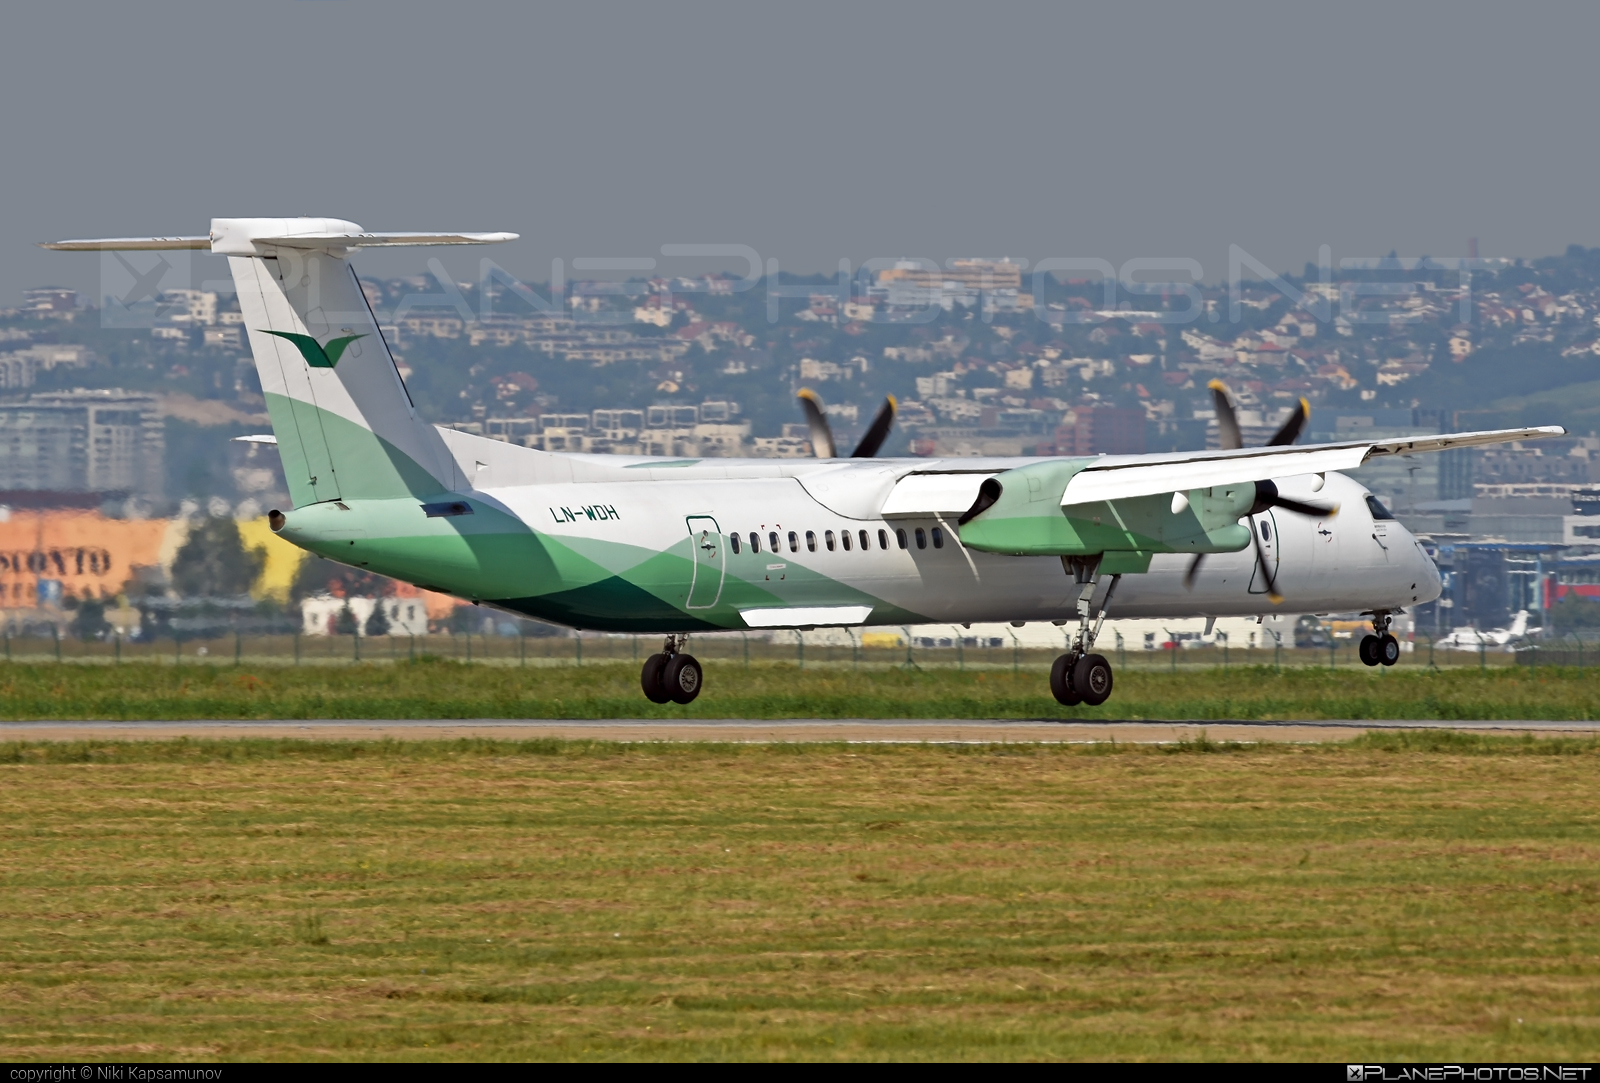 Bombardier DHC-8-Q402 Dash 8 - LN-WDH operated by Widerøe #bombardier #dash8 #dhc8 #dhc8q402 #wideroe